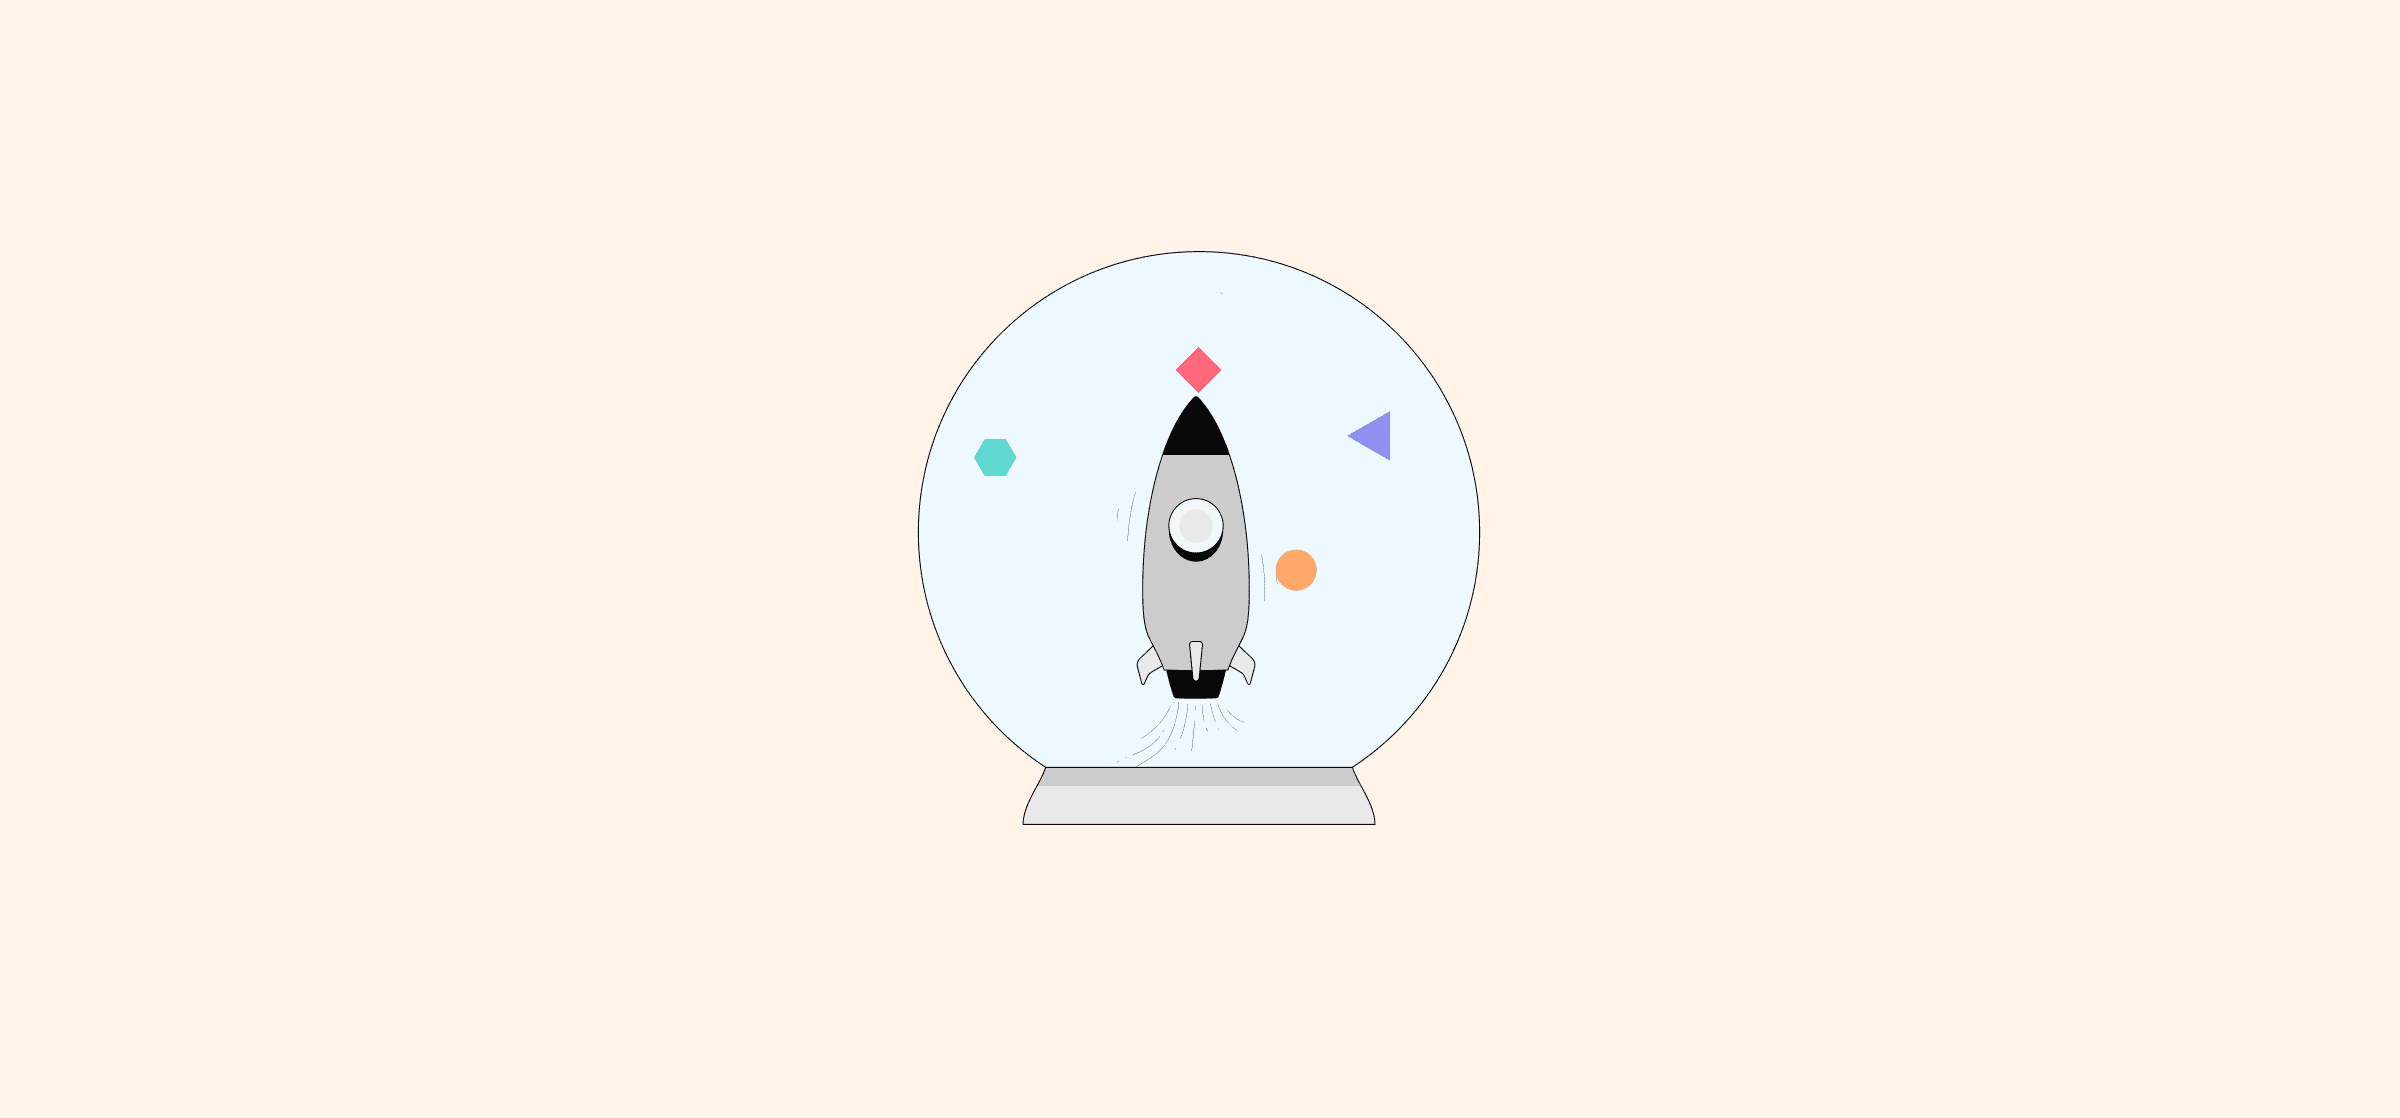 An illustration of a rocket in a snowglobe, representing the project management workflow.